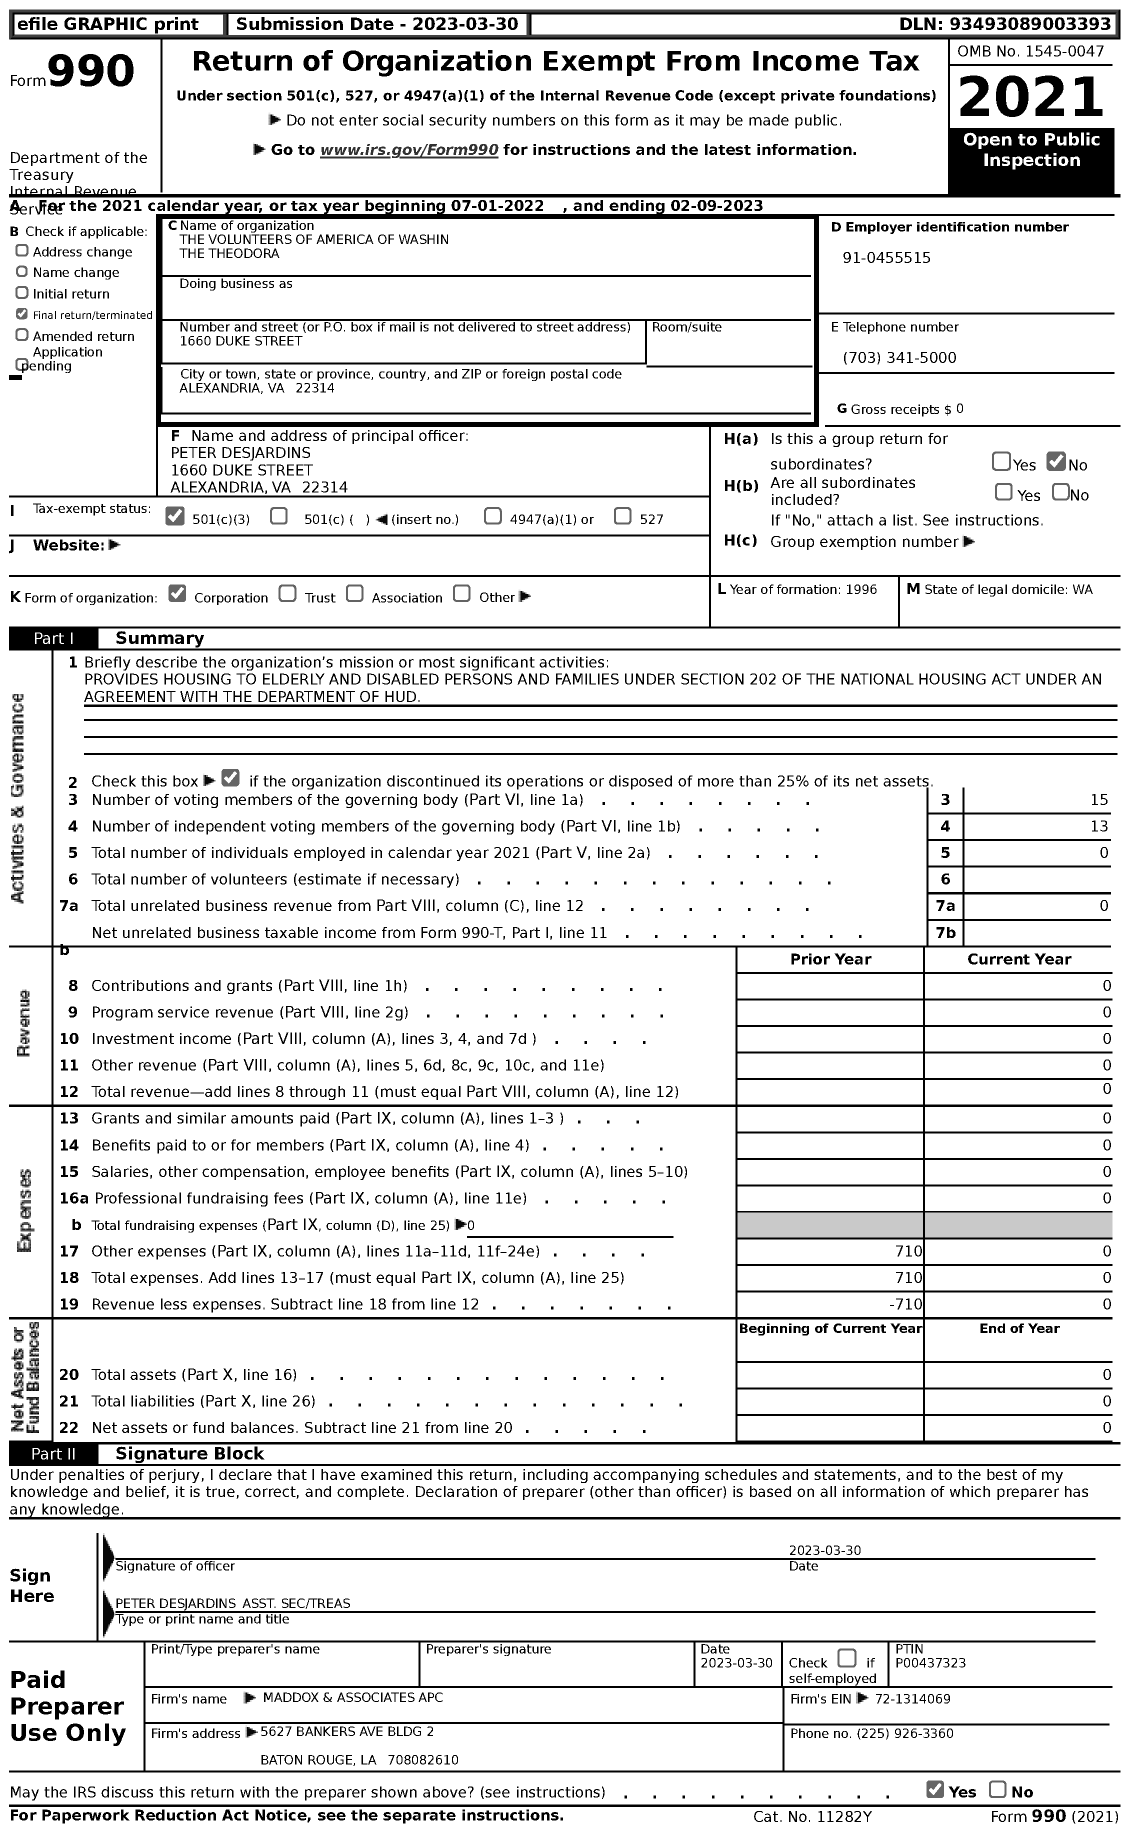 Image of first page of 2022 Form 990 for The Volunteers of America of Washin the Theodora (VOA)